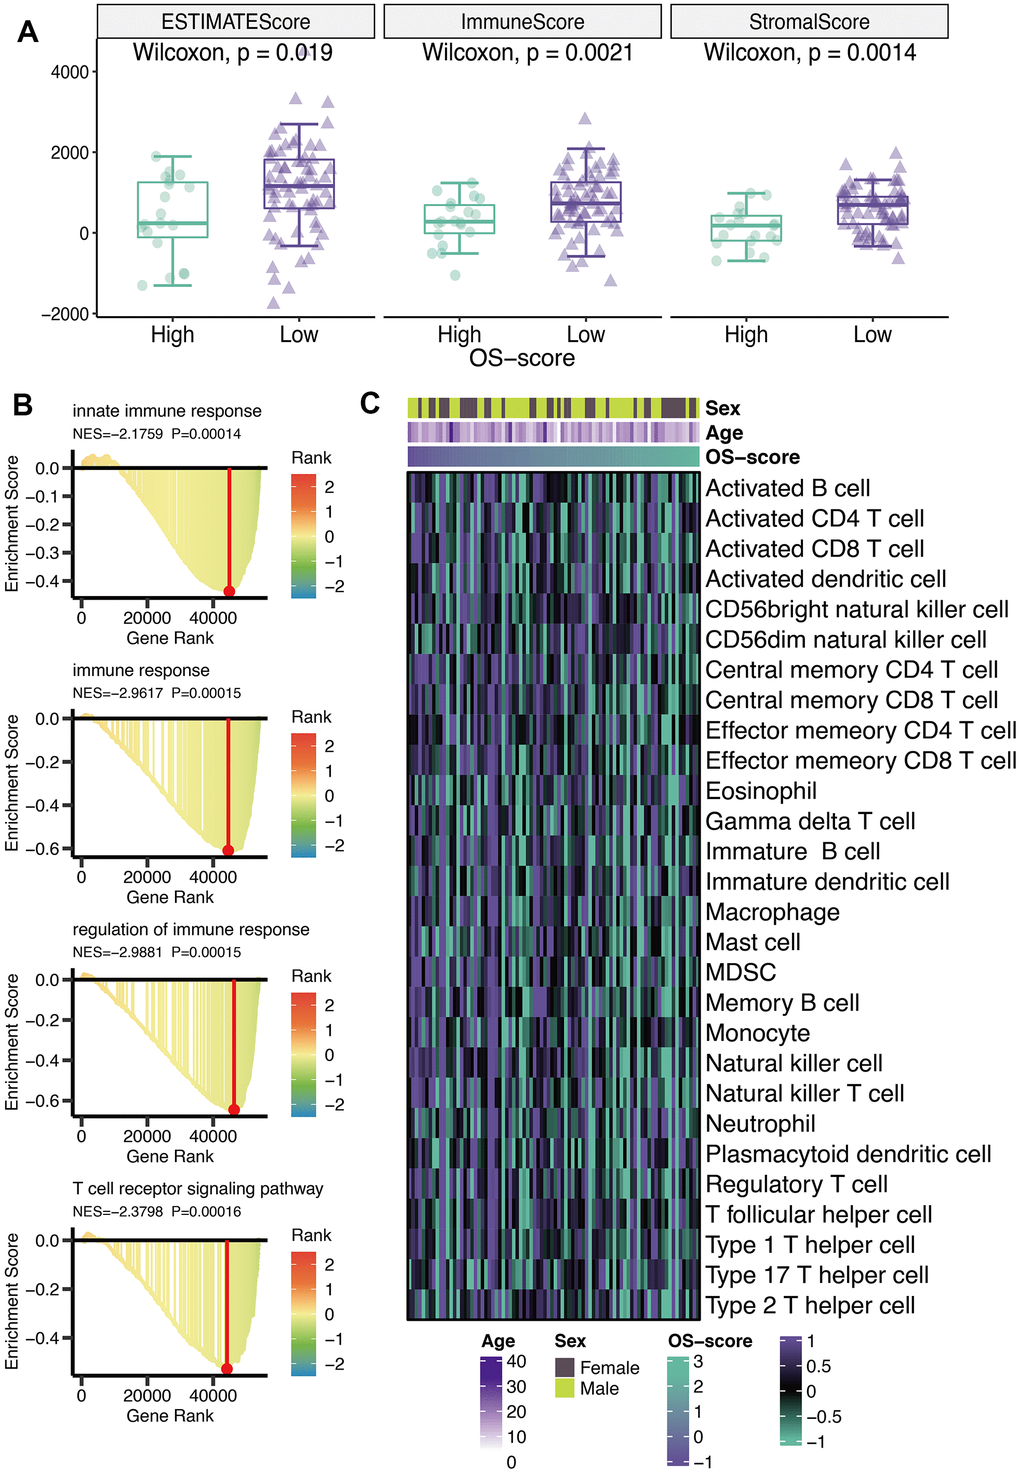 Immunological characteristics of OXS-signature for TARGET-OS. (A) The box plot comparing the differences between high- and low-OS-score on ESTIMATE score, immune score, and stromal score, with the green images representing the group with higher OS-scores, and the purple images representing the group with lower OS-scores; (B) GO analysis for immune-related pathways potentially regulated by OXS-signature; (C) The heatmap of the abundance of infiltrating immune cell populations at different OS-scores.